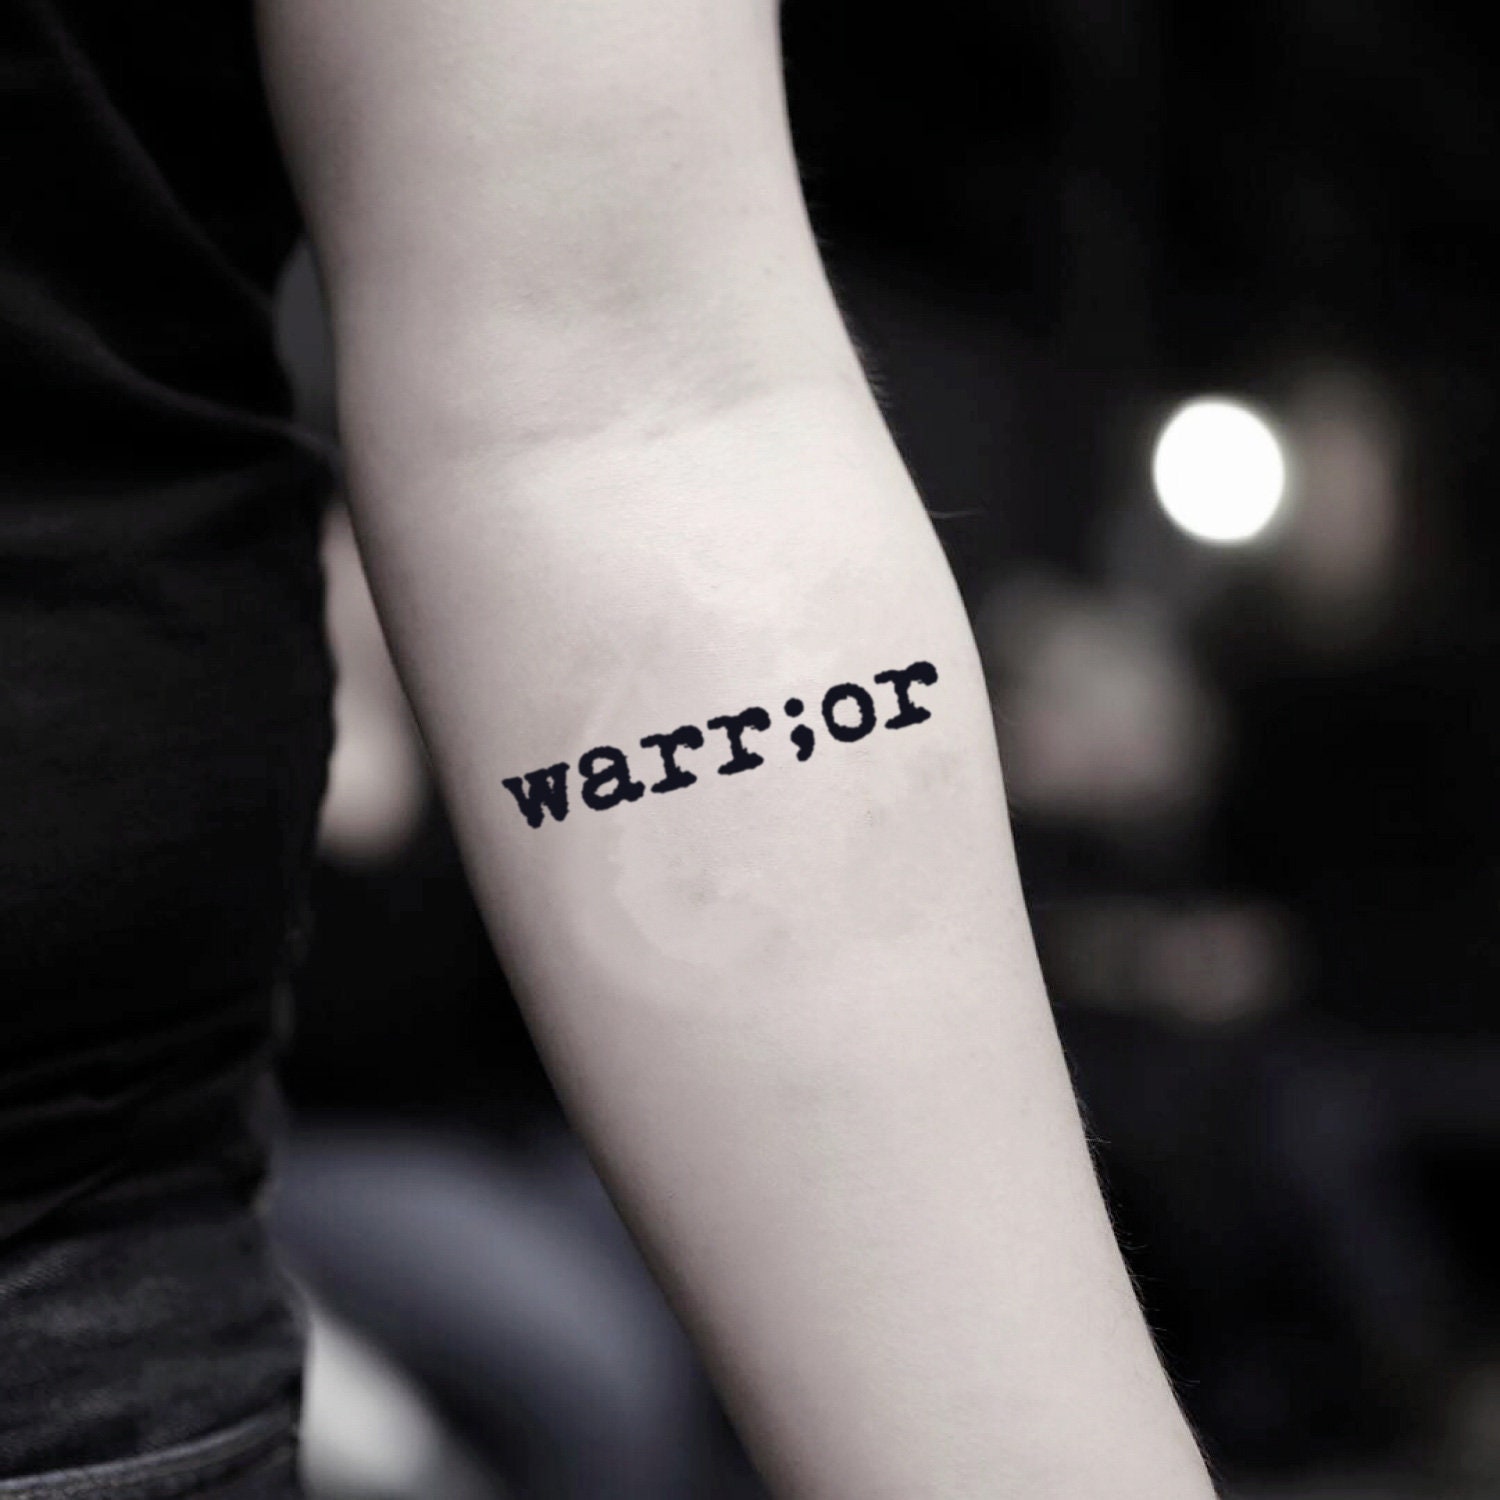 The Warrior Tattoo  Art Studio  One word frees us of all the weight and  pain of life That word is love Tattoo Goals couplestattoo couplesgoals  heartcouple Design ink husbandandwife forlove 